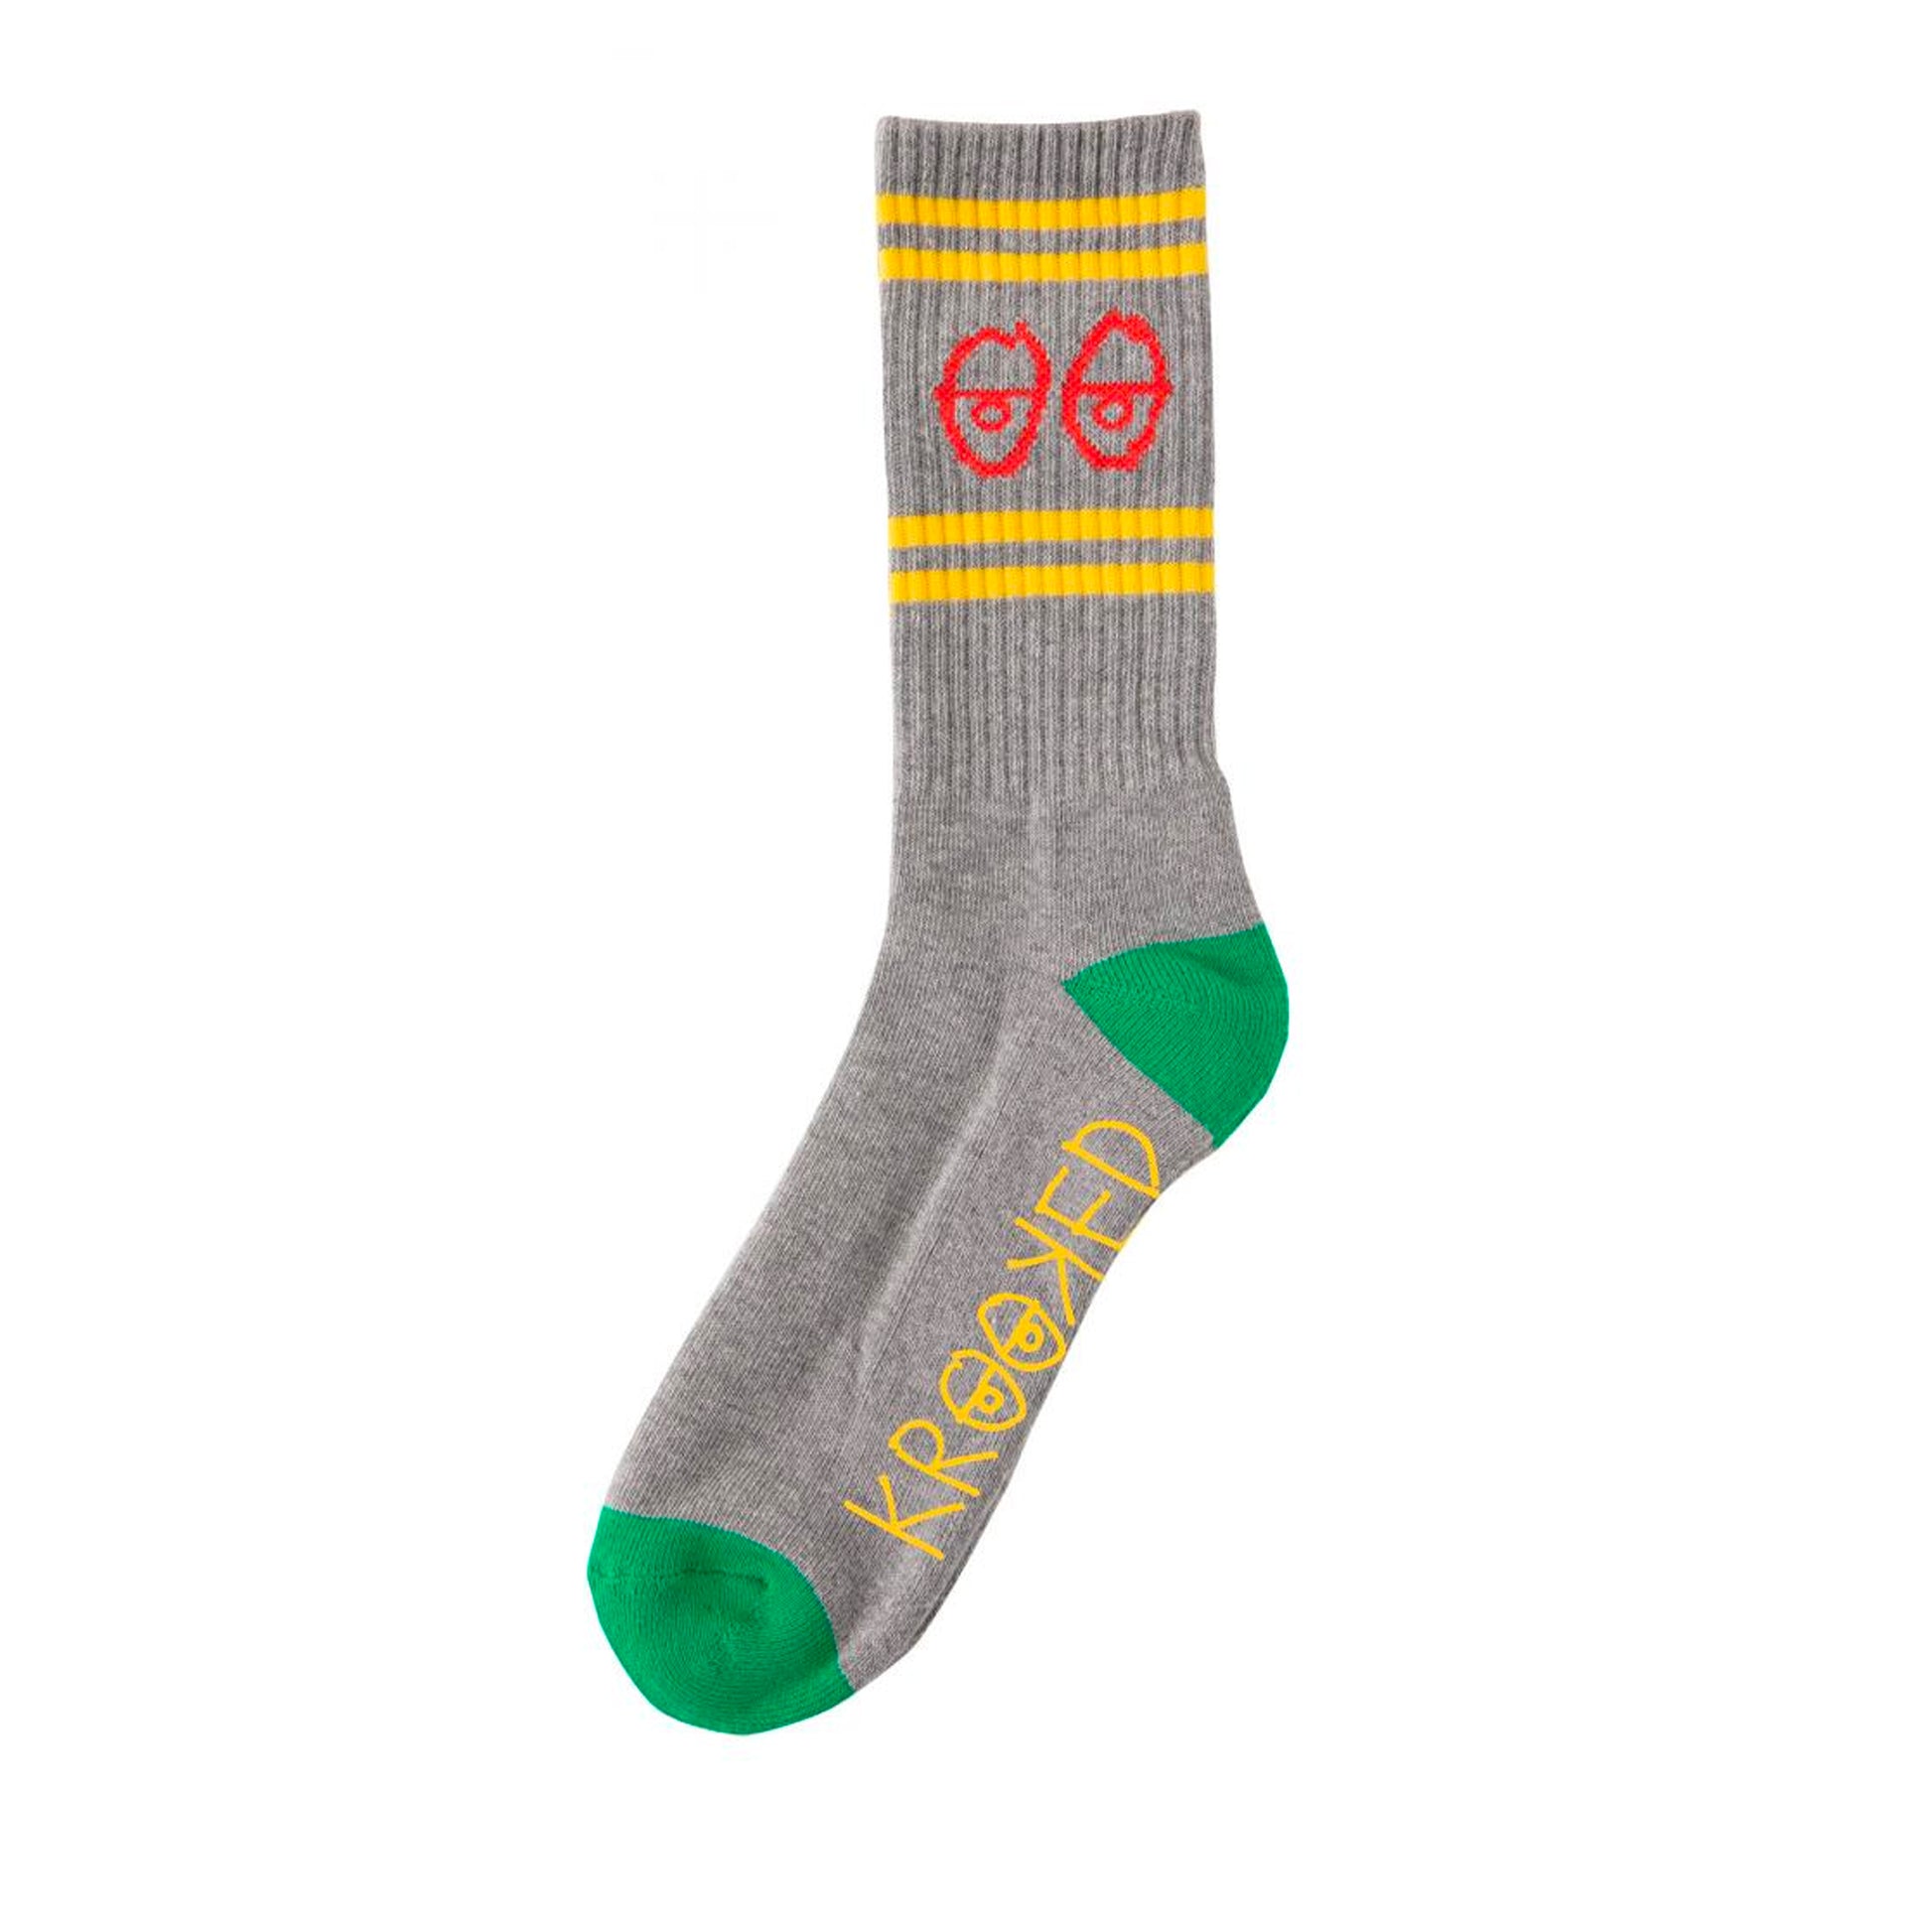 Krooked Socks Eyes Heather Grey/Green/Yellow/Red - Prime Delux Store